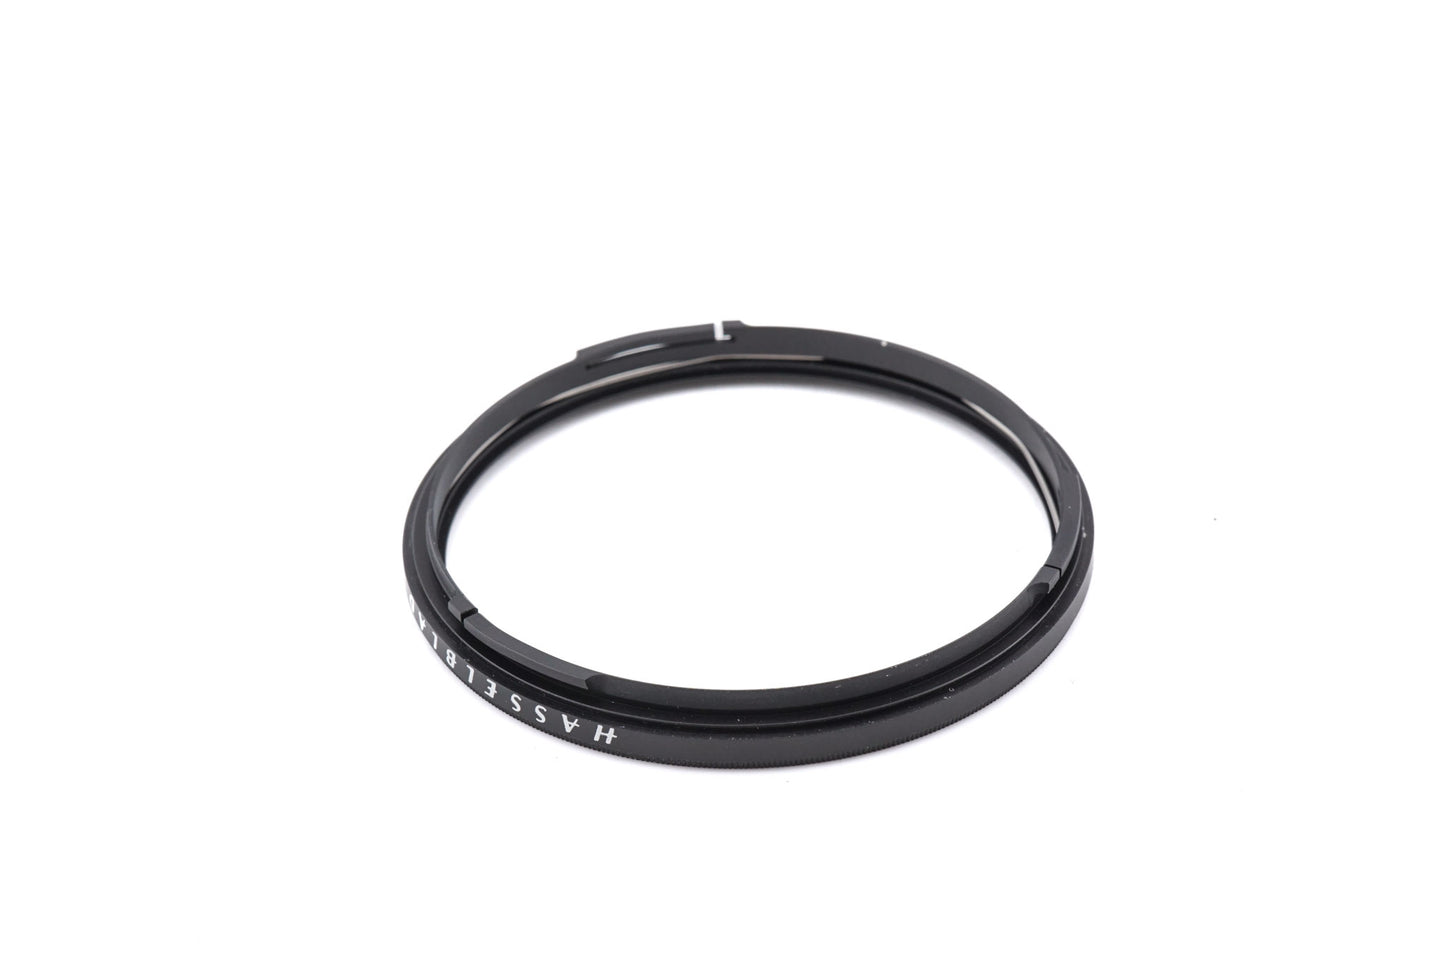 Hasselblad 60-63 Step-Up Ring (51638)